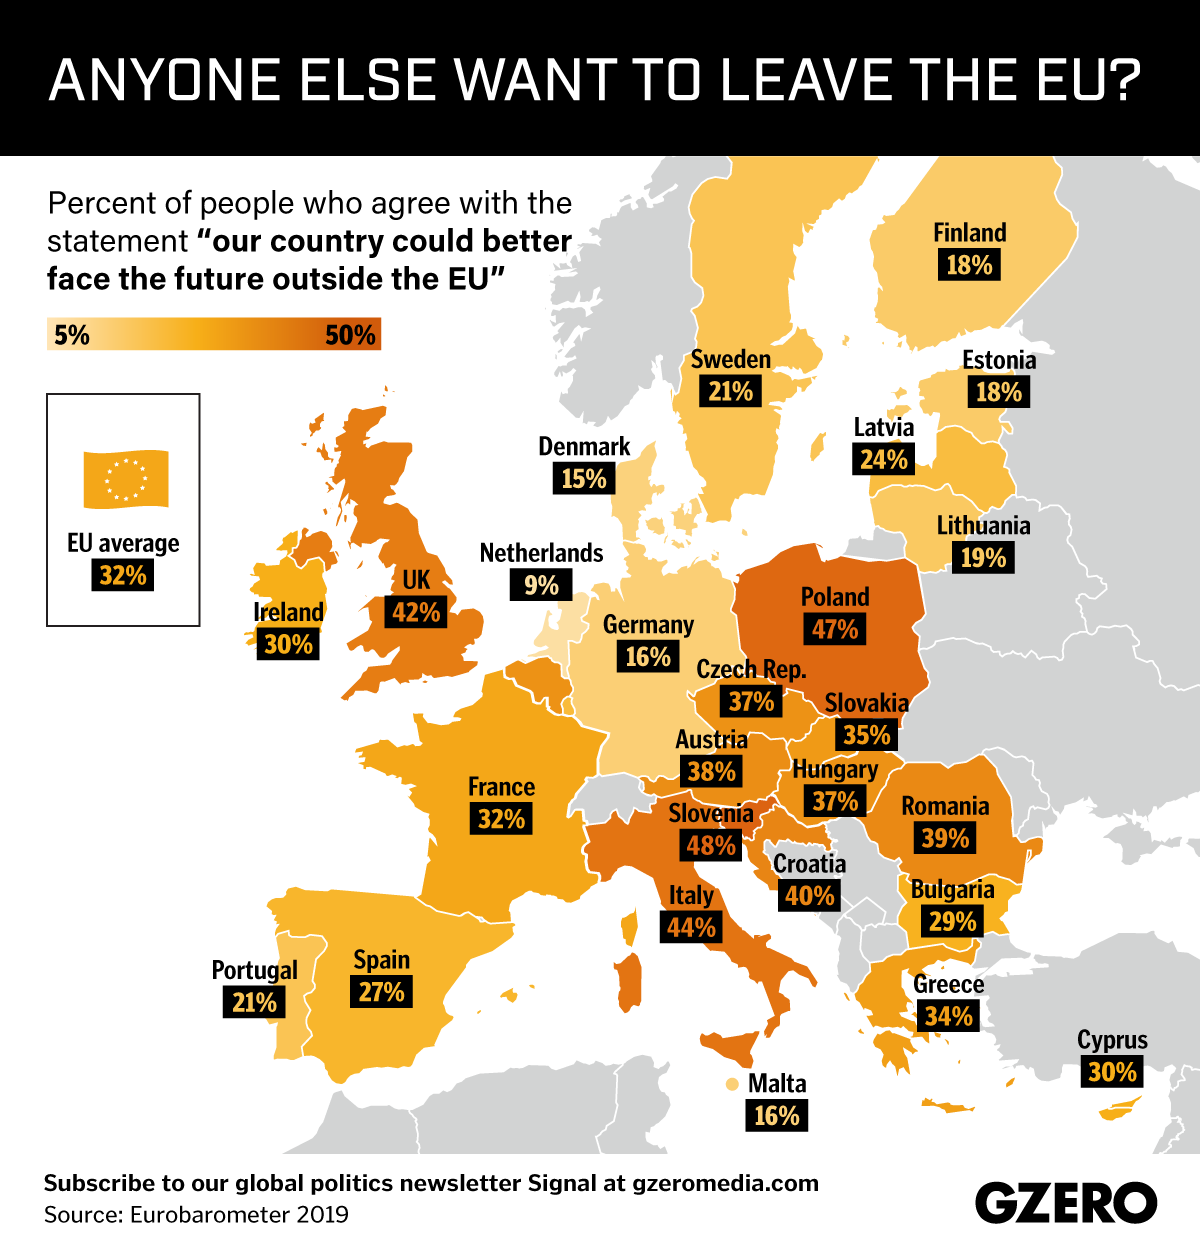 The Graphic Truth: Does anyone else want to leave the EU?